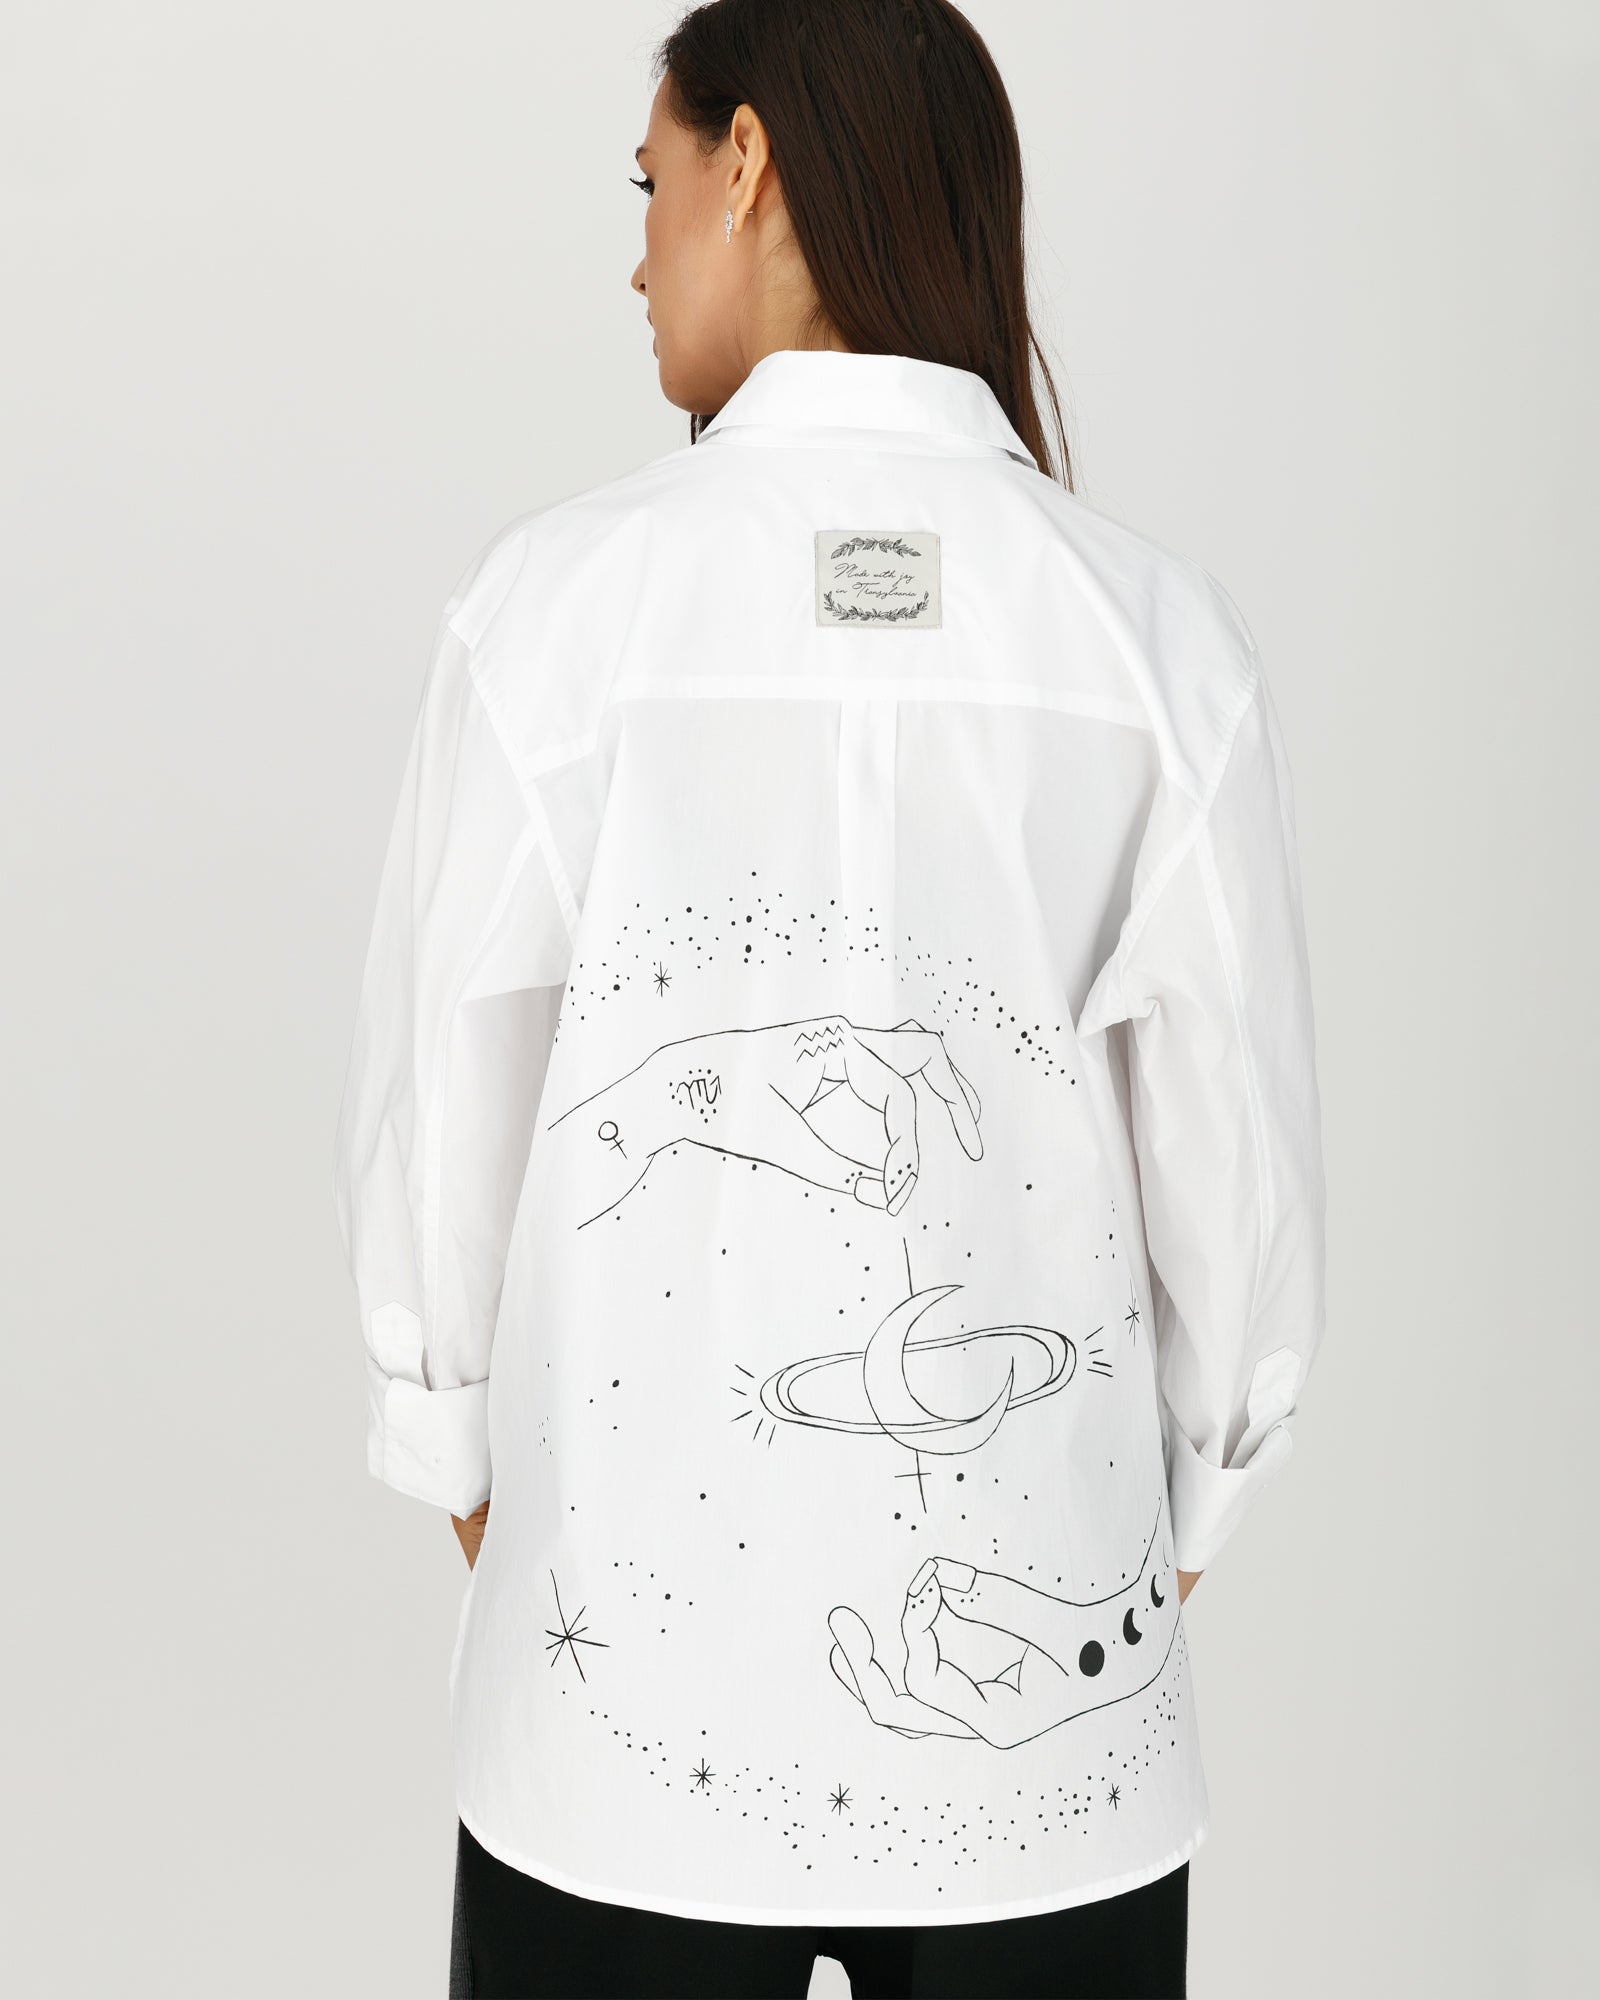 Women's hand-painted shirt "Steering the moon"